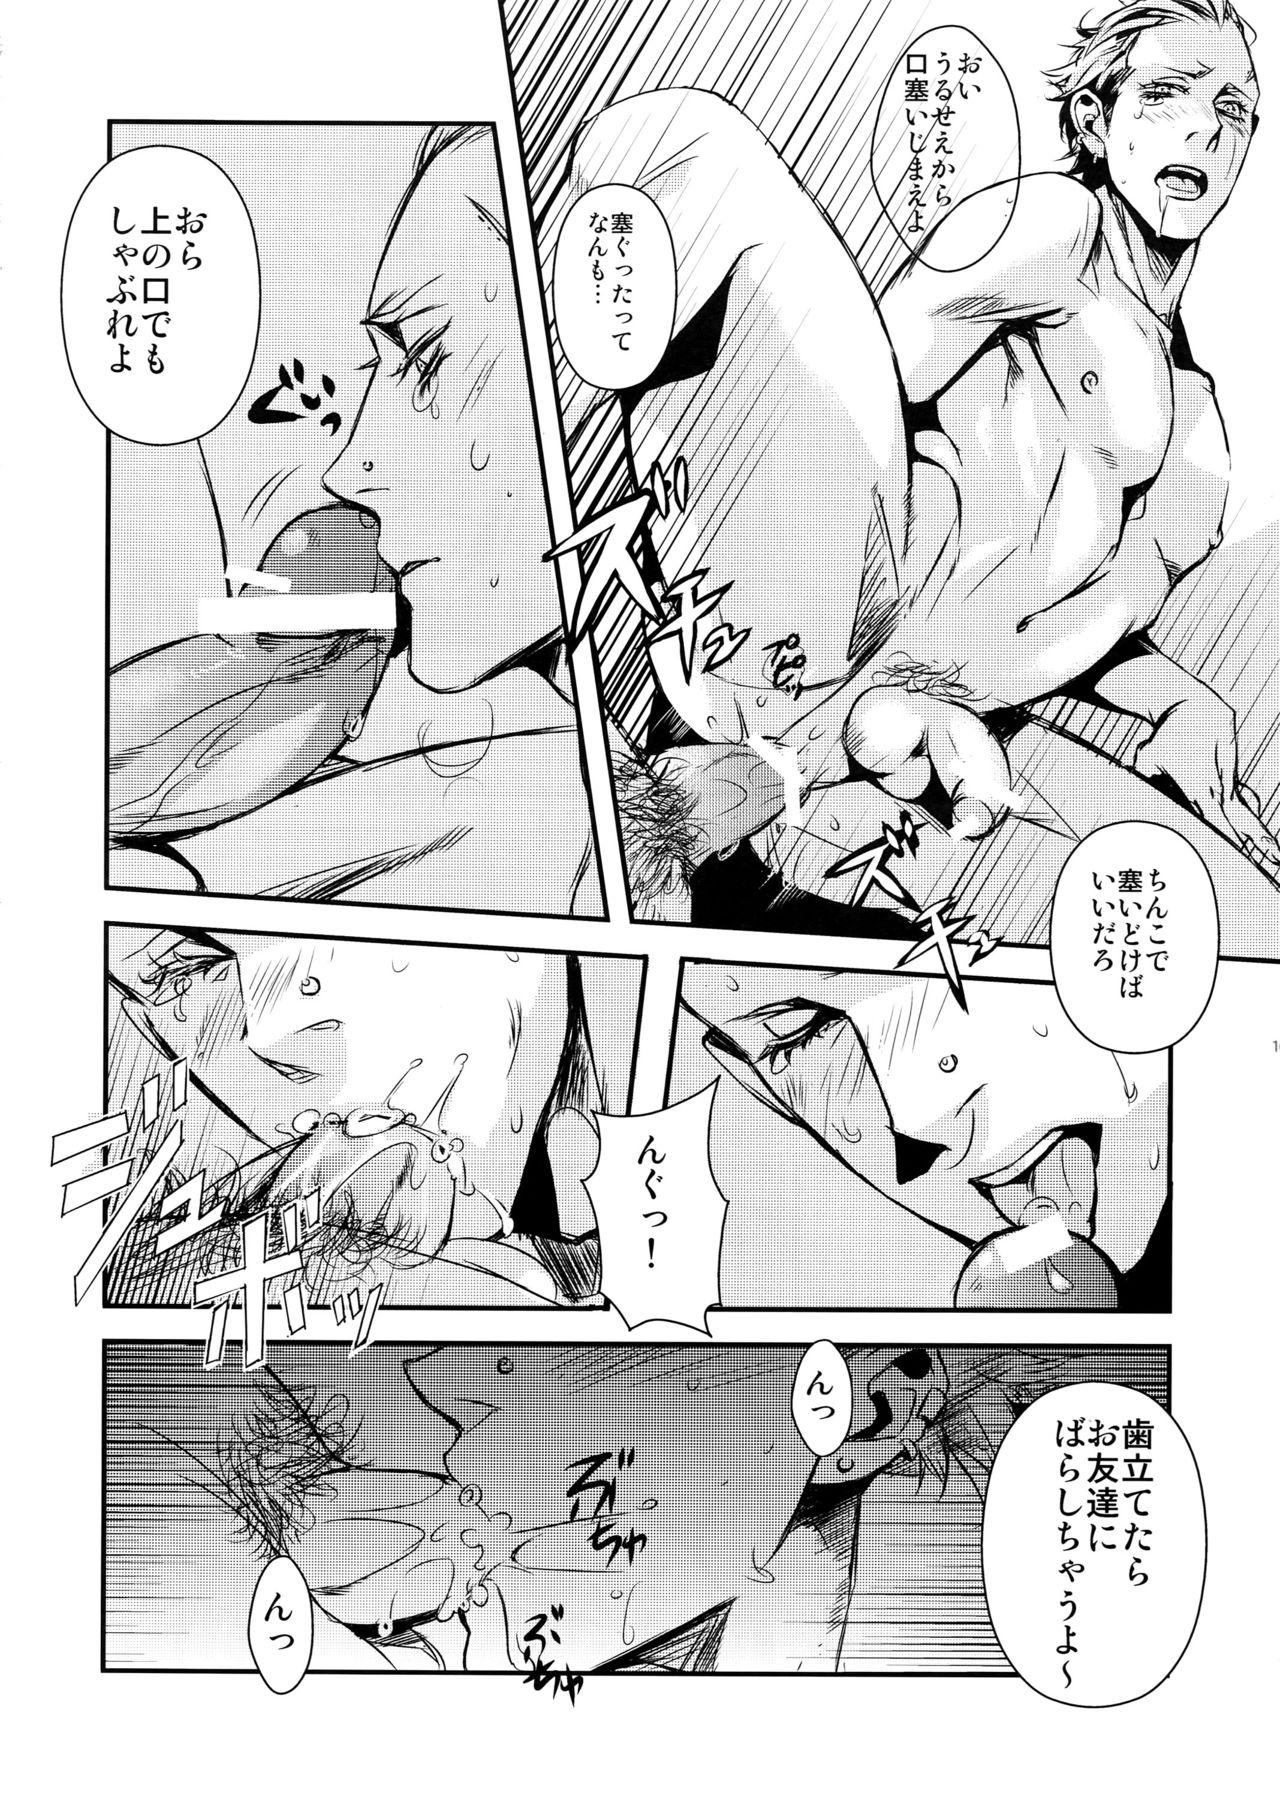 Breast night has become a sunny dawn because of you - Persona 4 Shin megami tensei For - Page 9